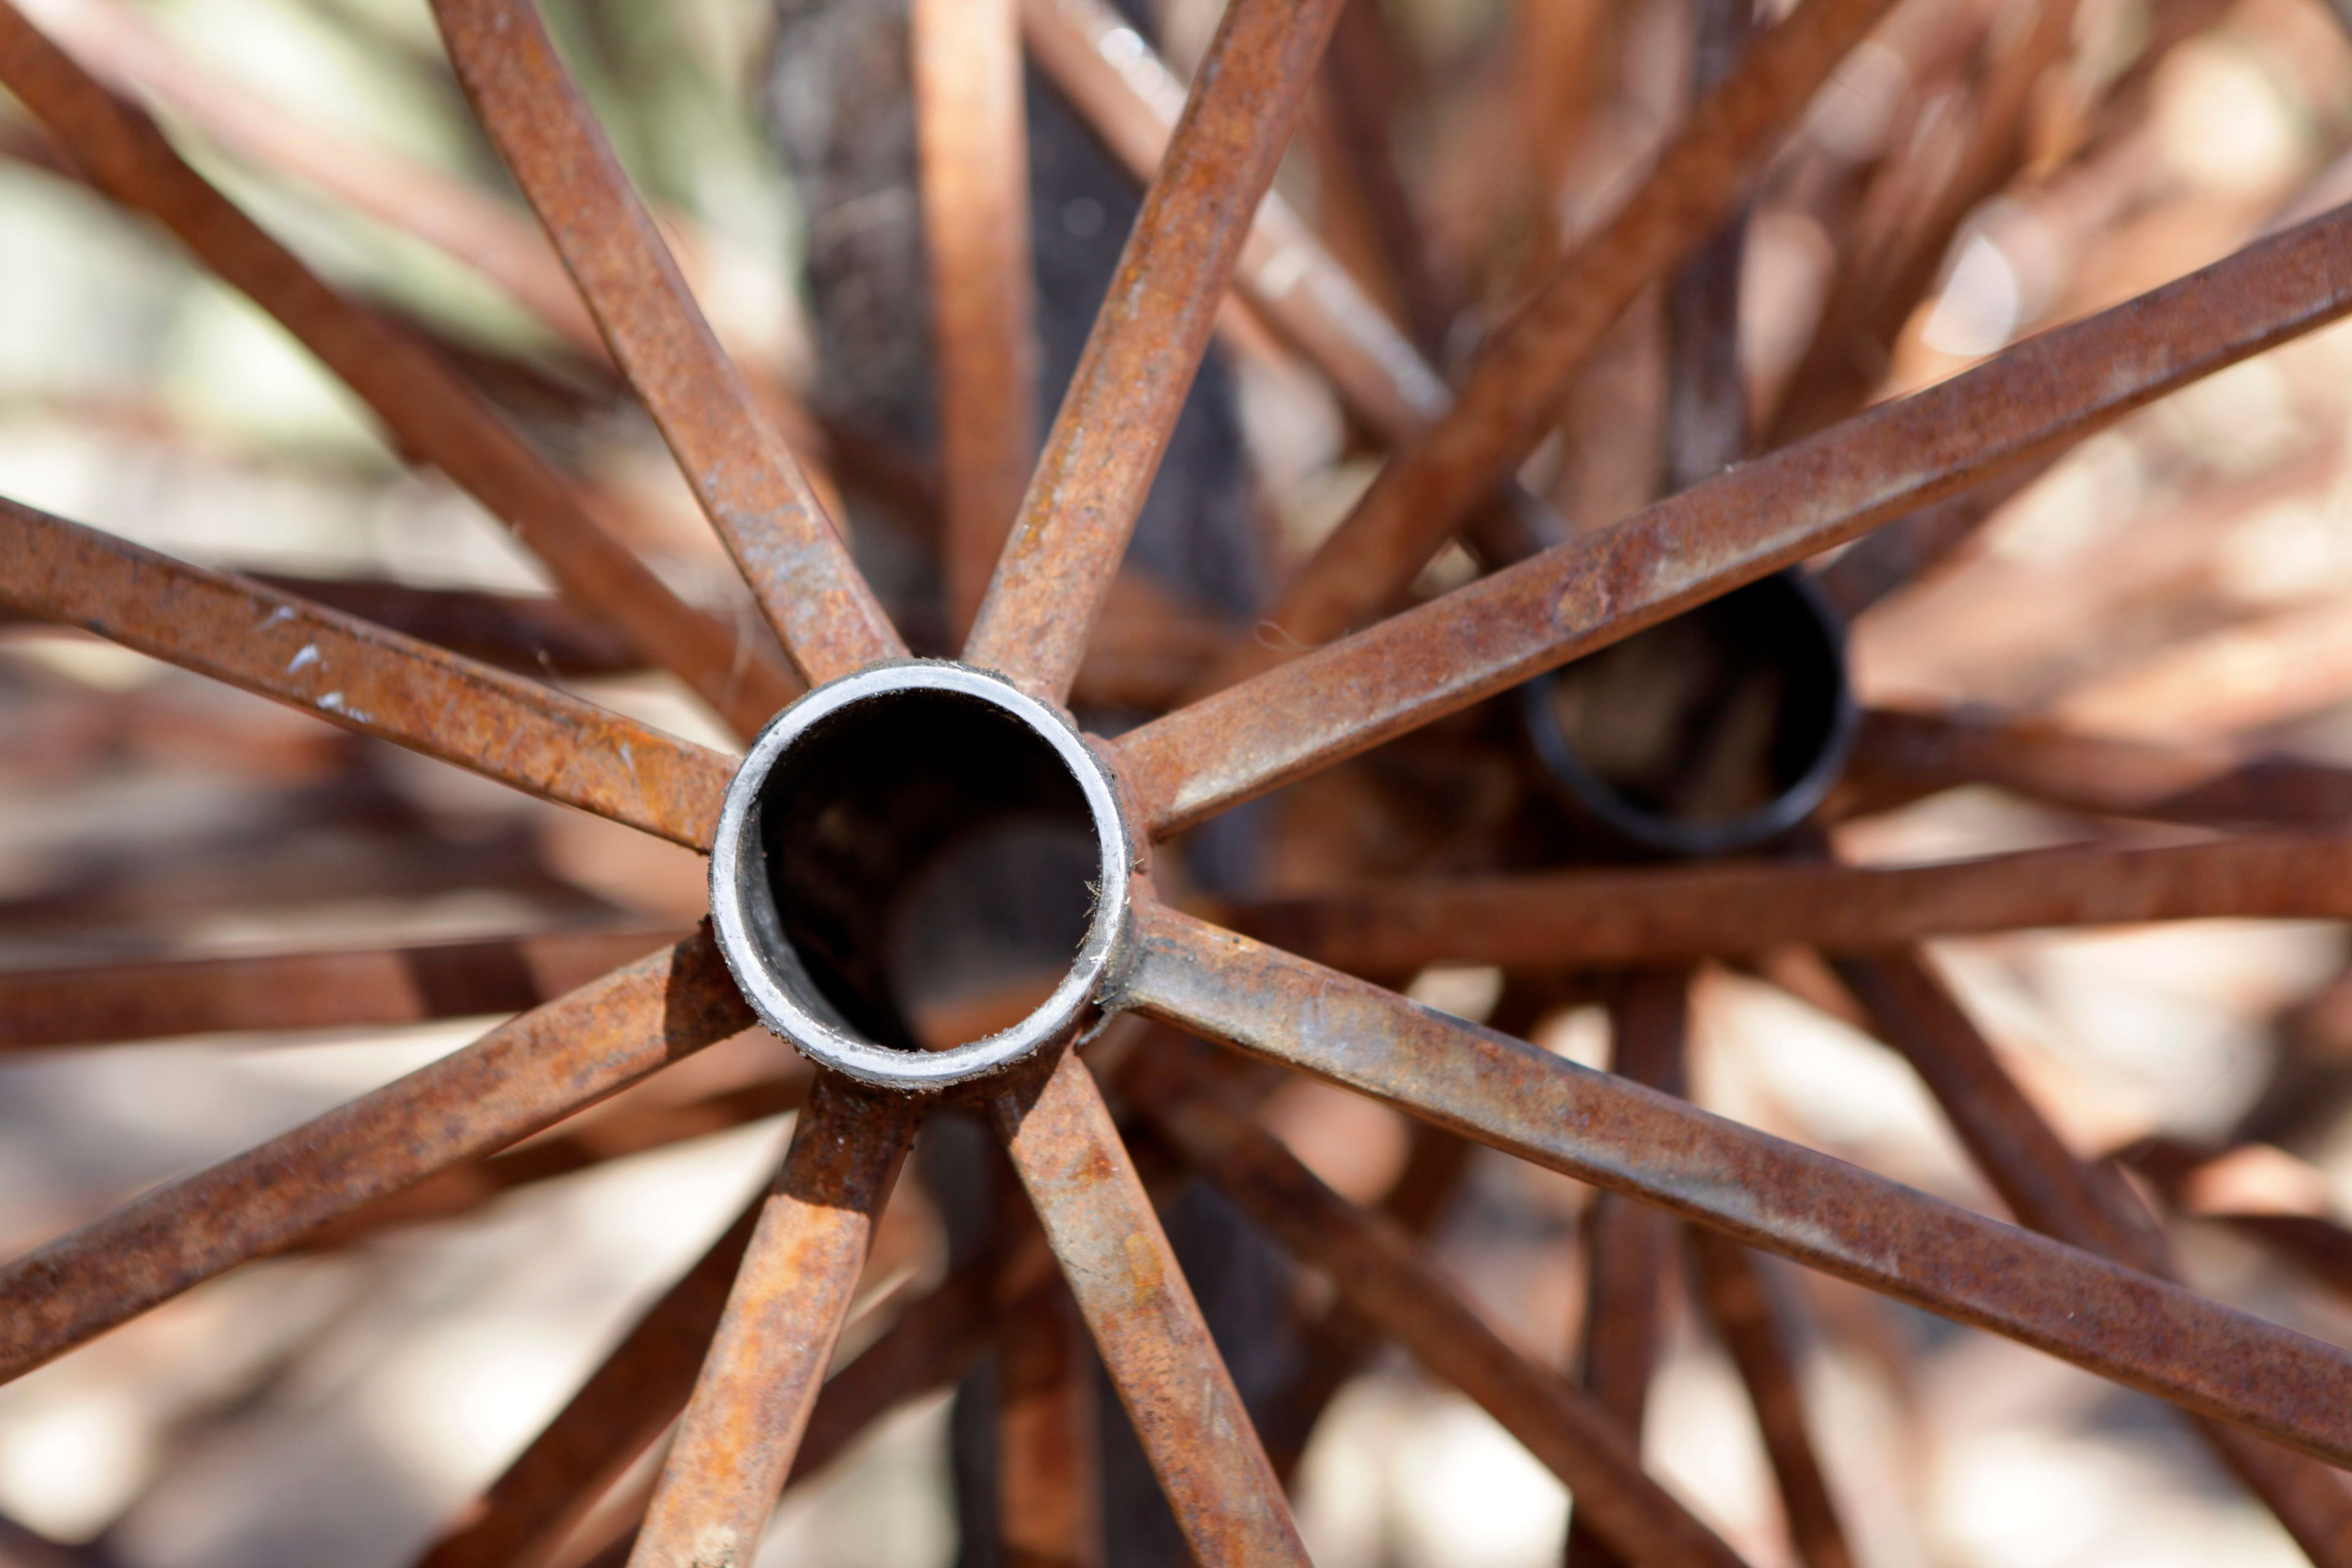 A picture of wagon wheel spokes, with more in the background.